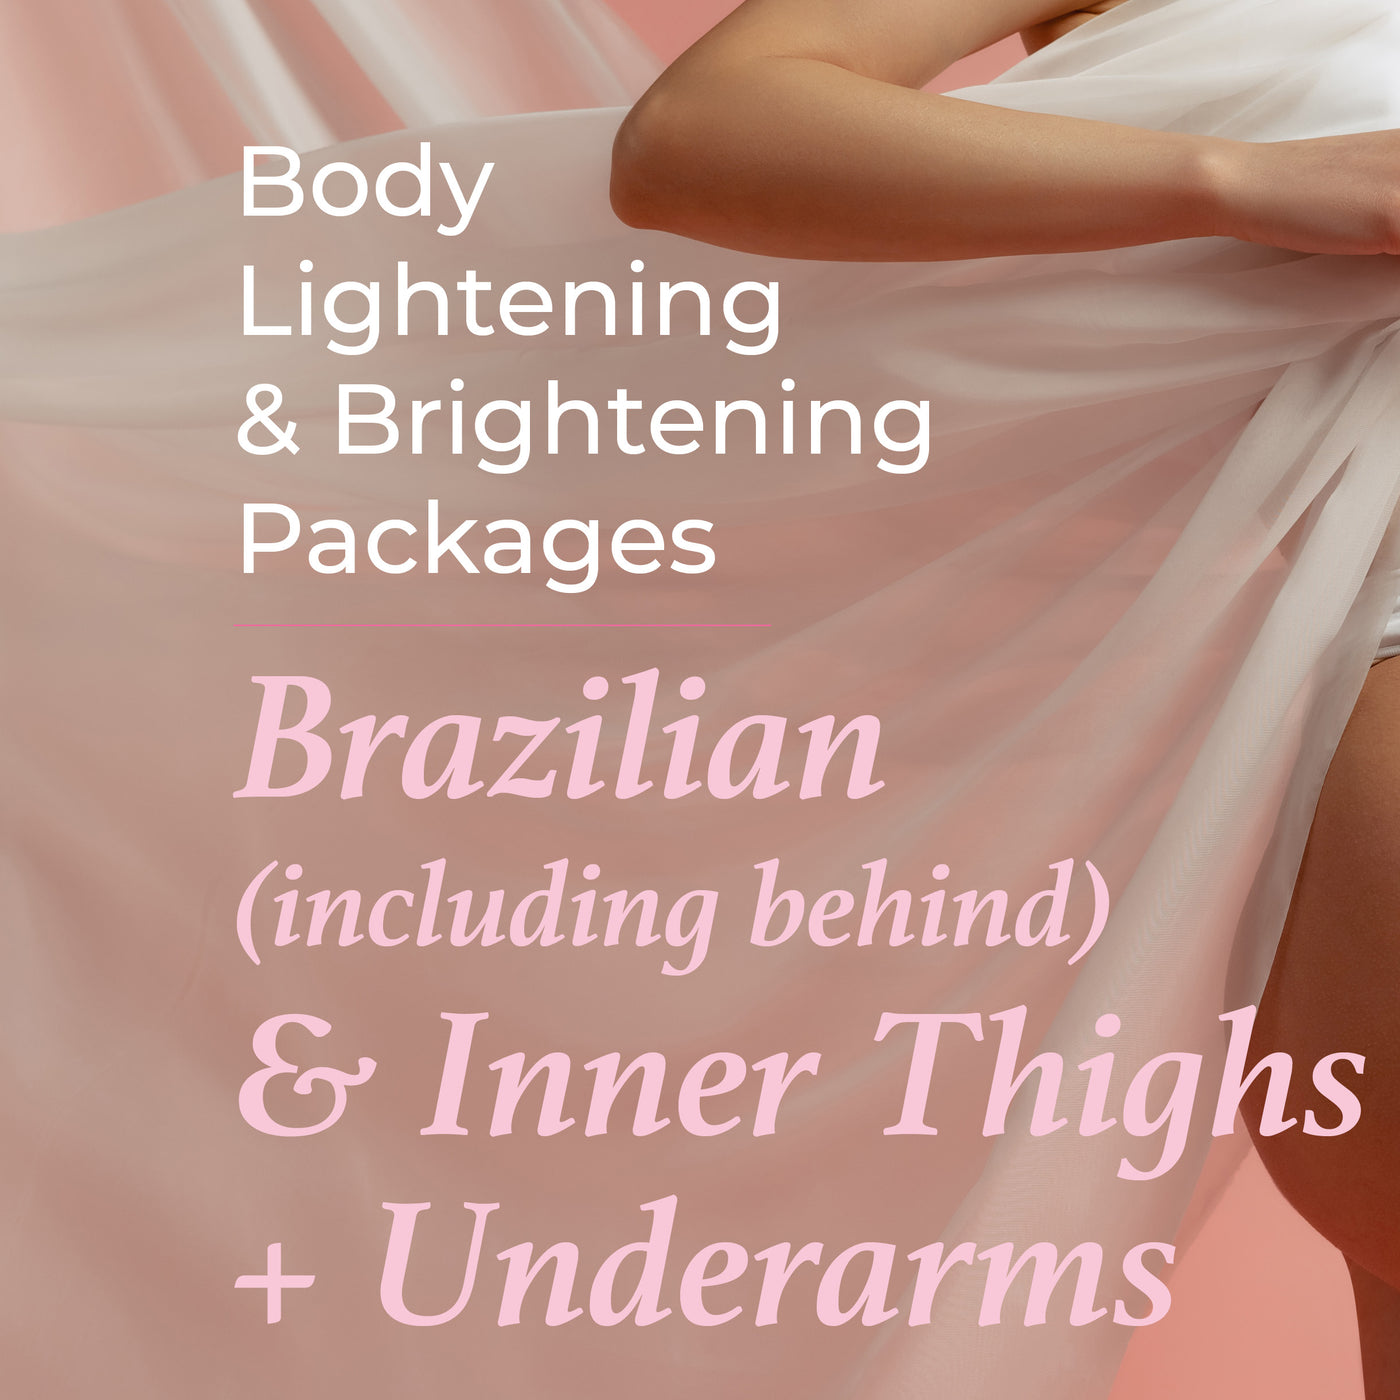 Body Lightening Package - Brazilian (including behind) & Inner Thighs + Underarms